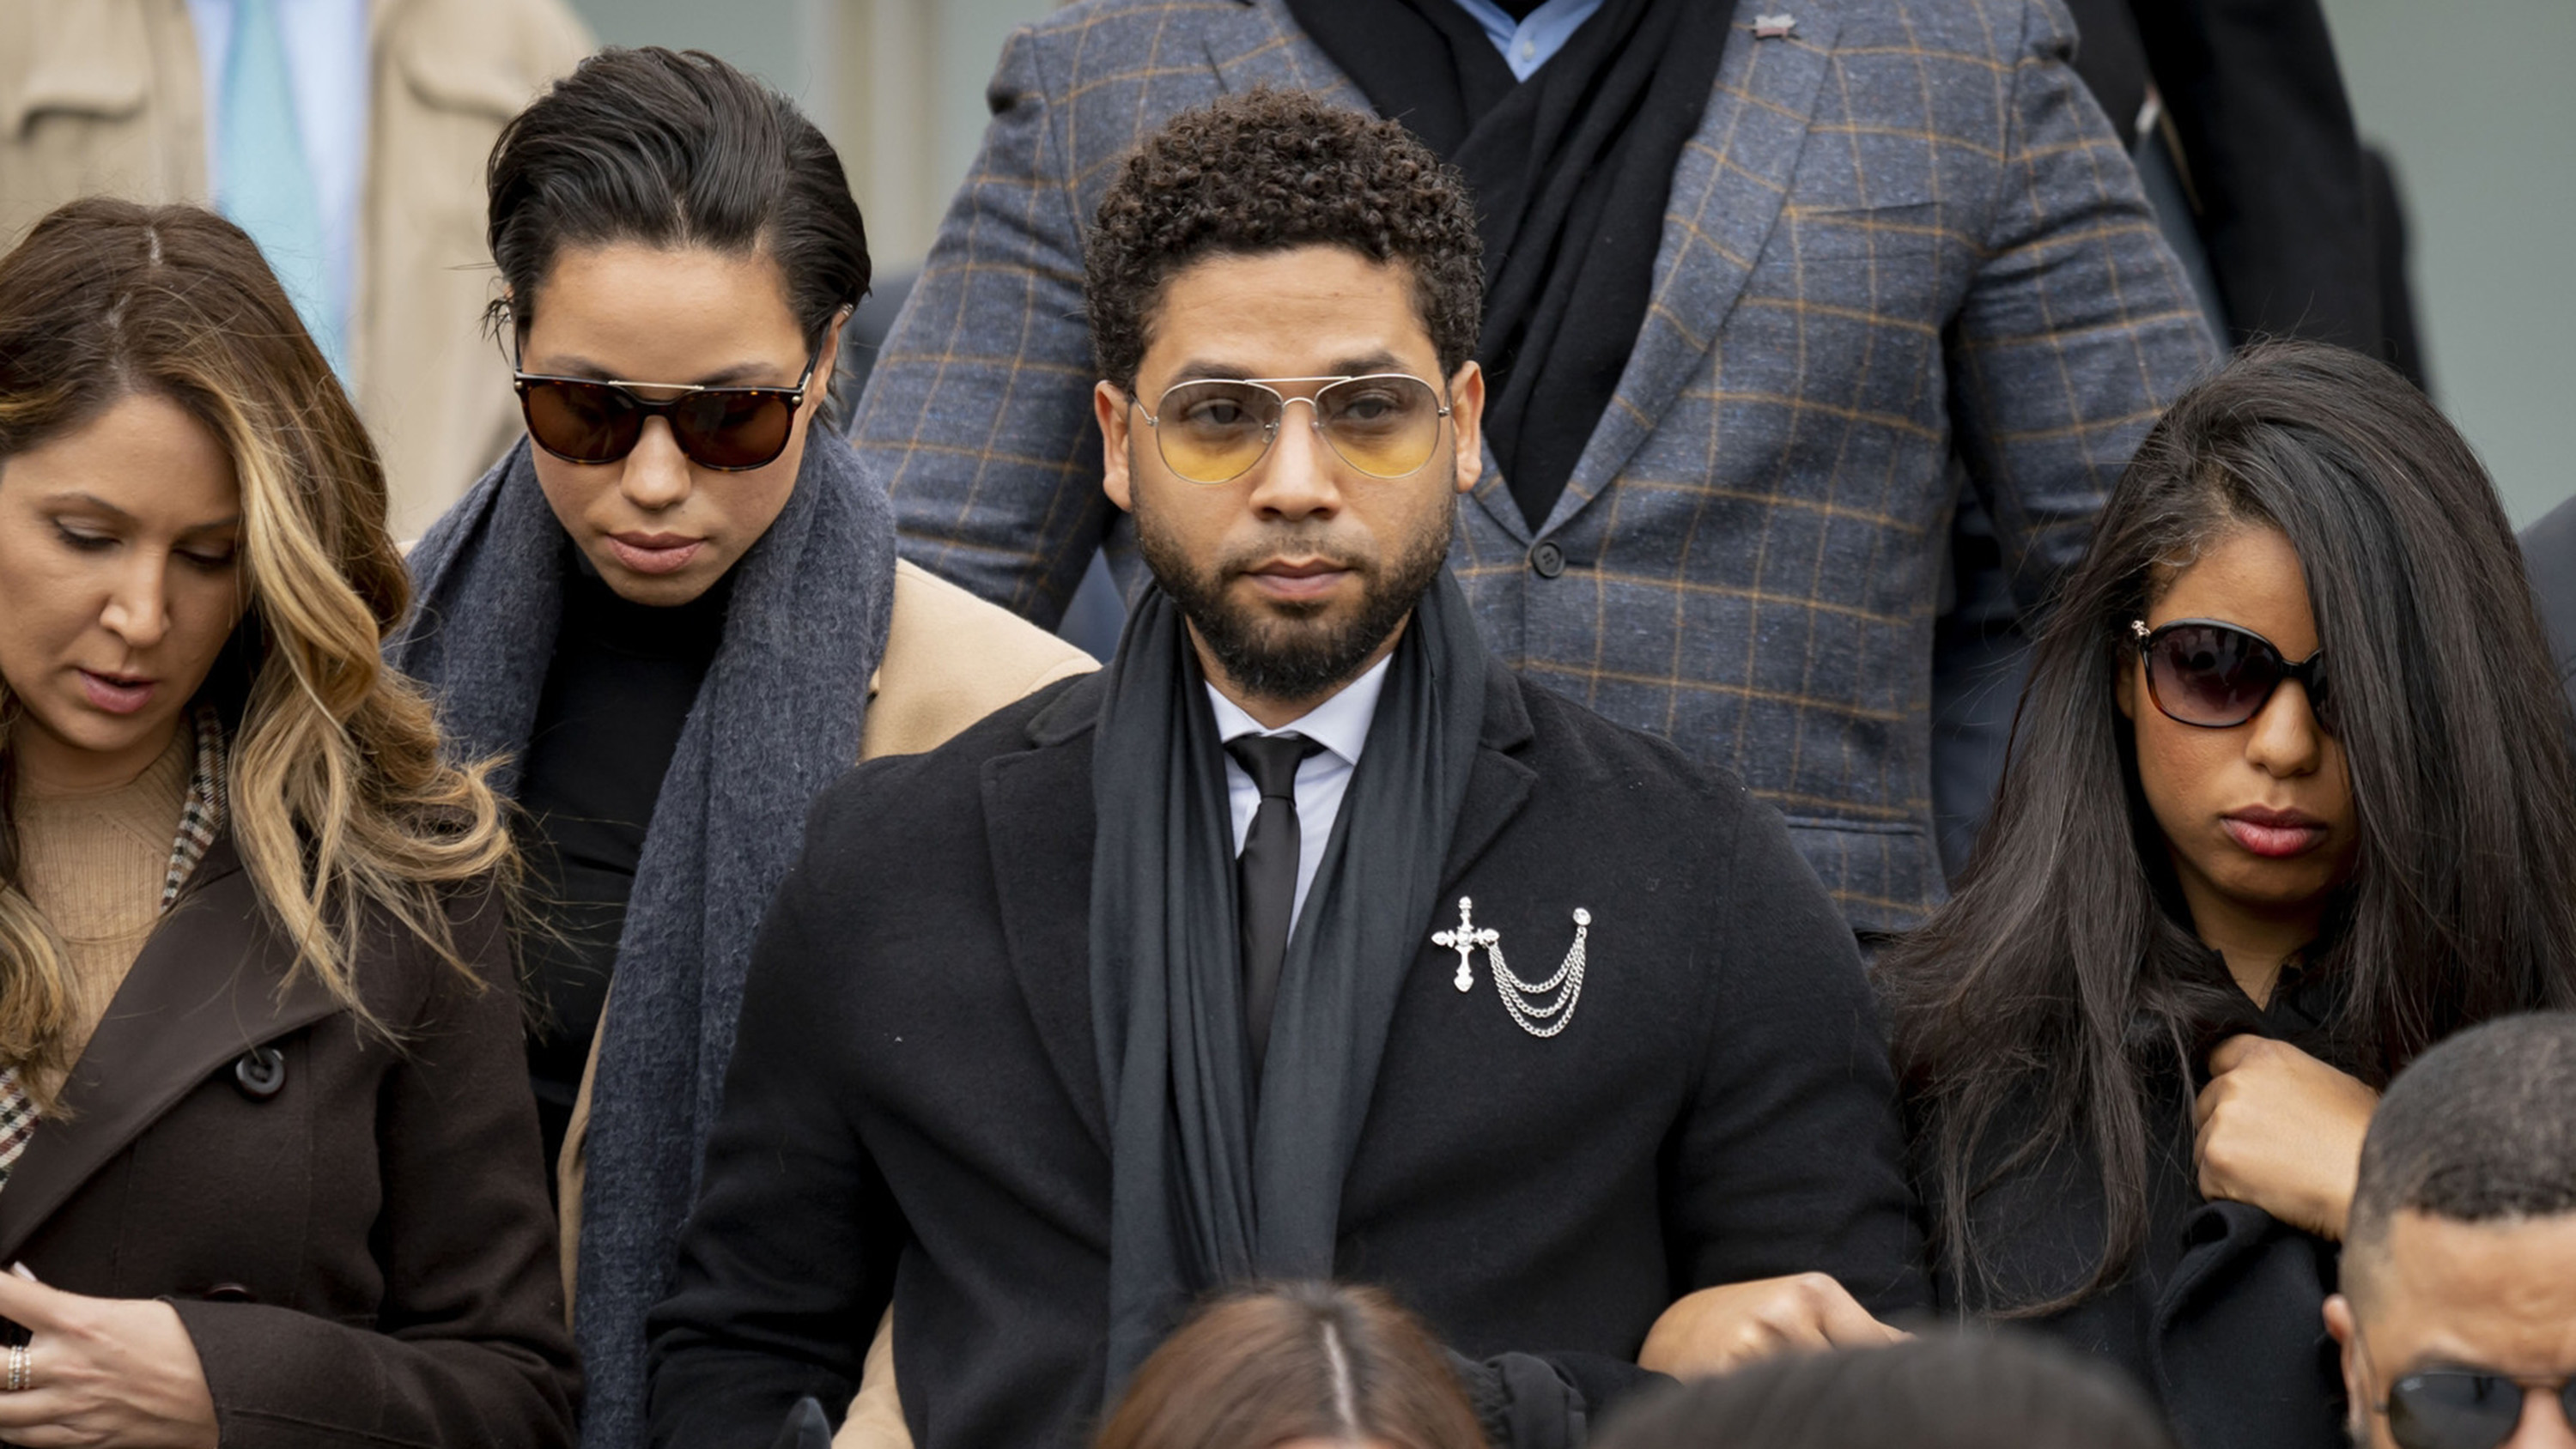 Jussie Smollett departs after a court appearance Monday, Feb. 24, 2020 at the Leighton Criminal Courts Building in Chicago.